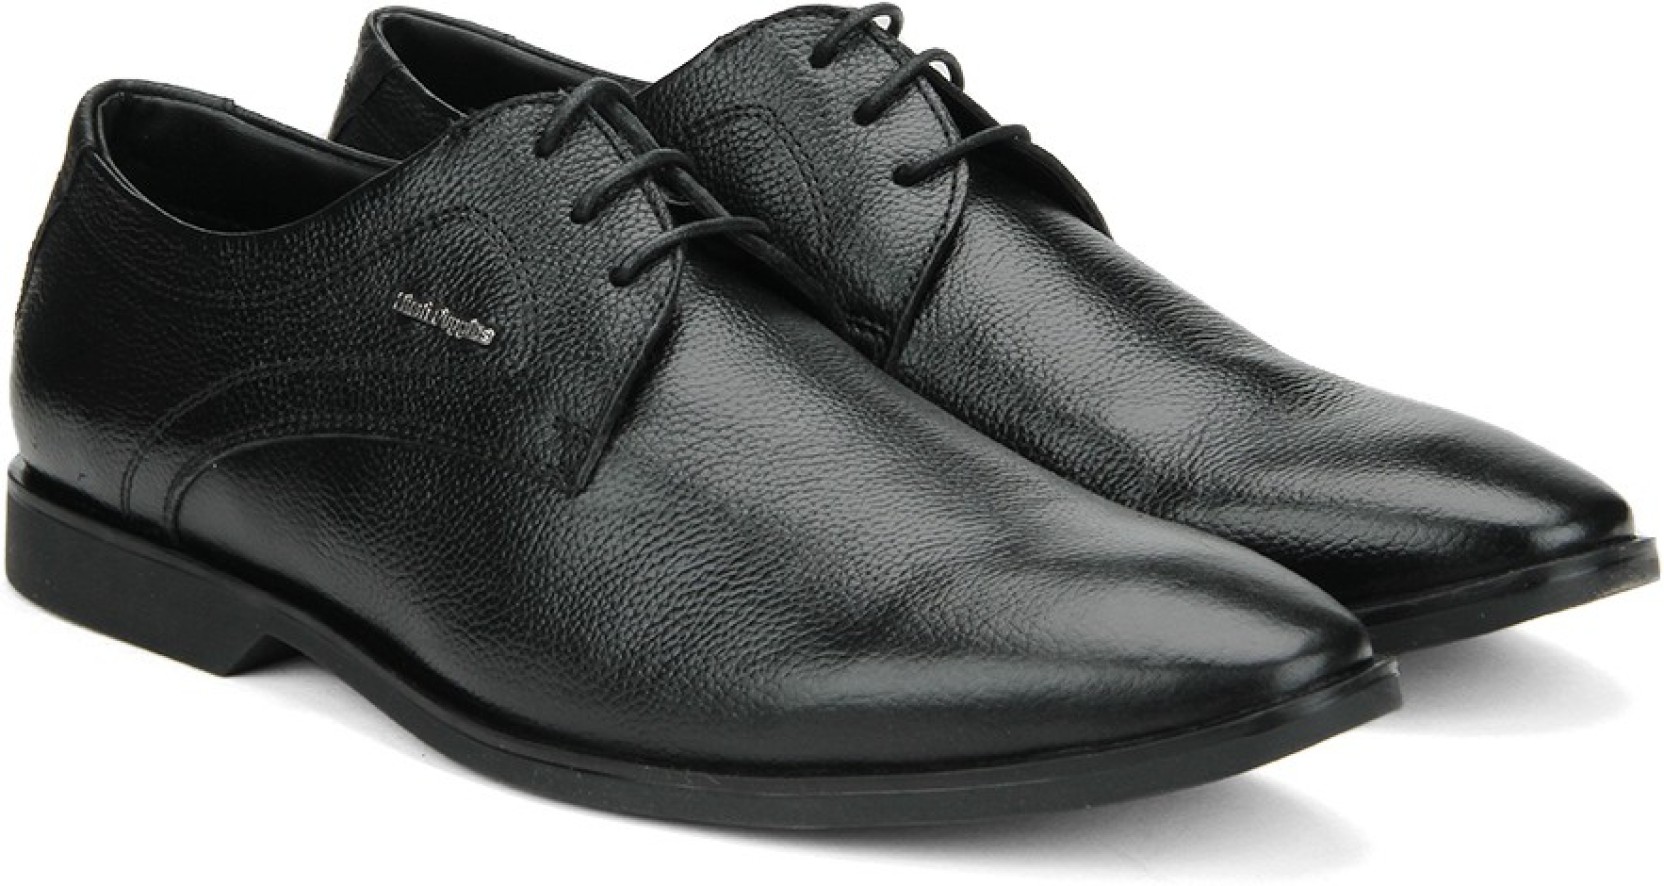 Hush Puppies By Bata Derby Lace Up Shoes Buy Black Color Hush Puppies By Bata Derby Lace Up